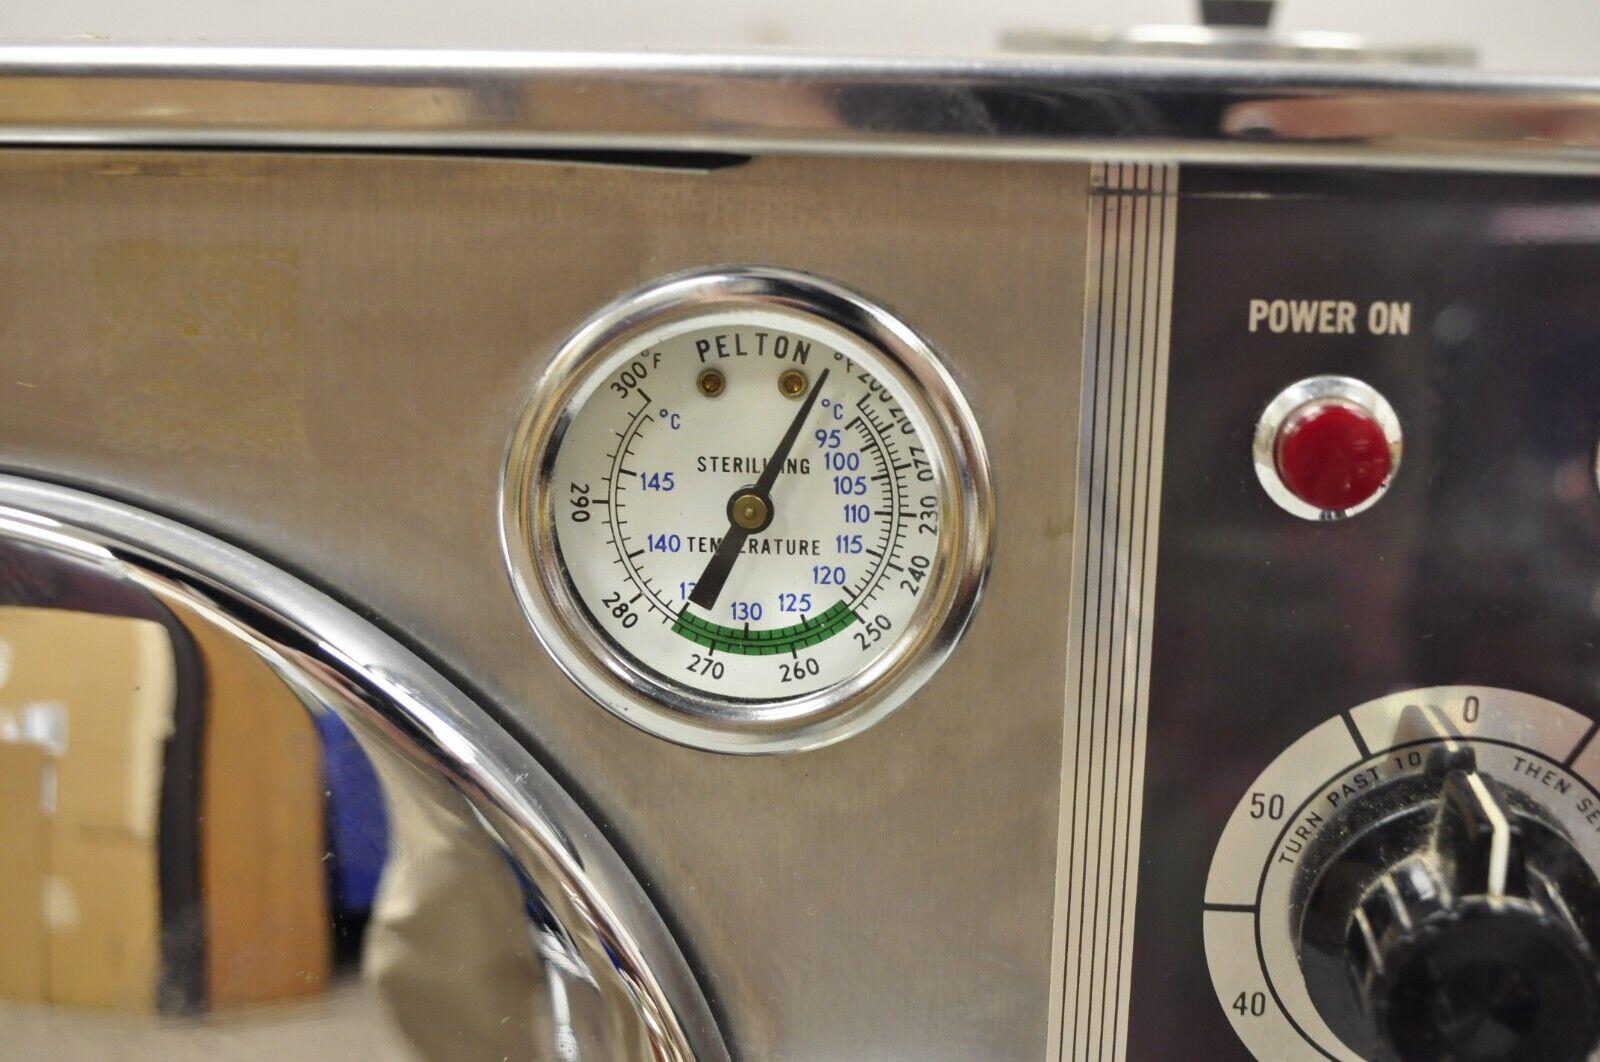 second hand autoclave for sale uk